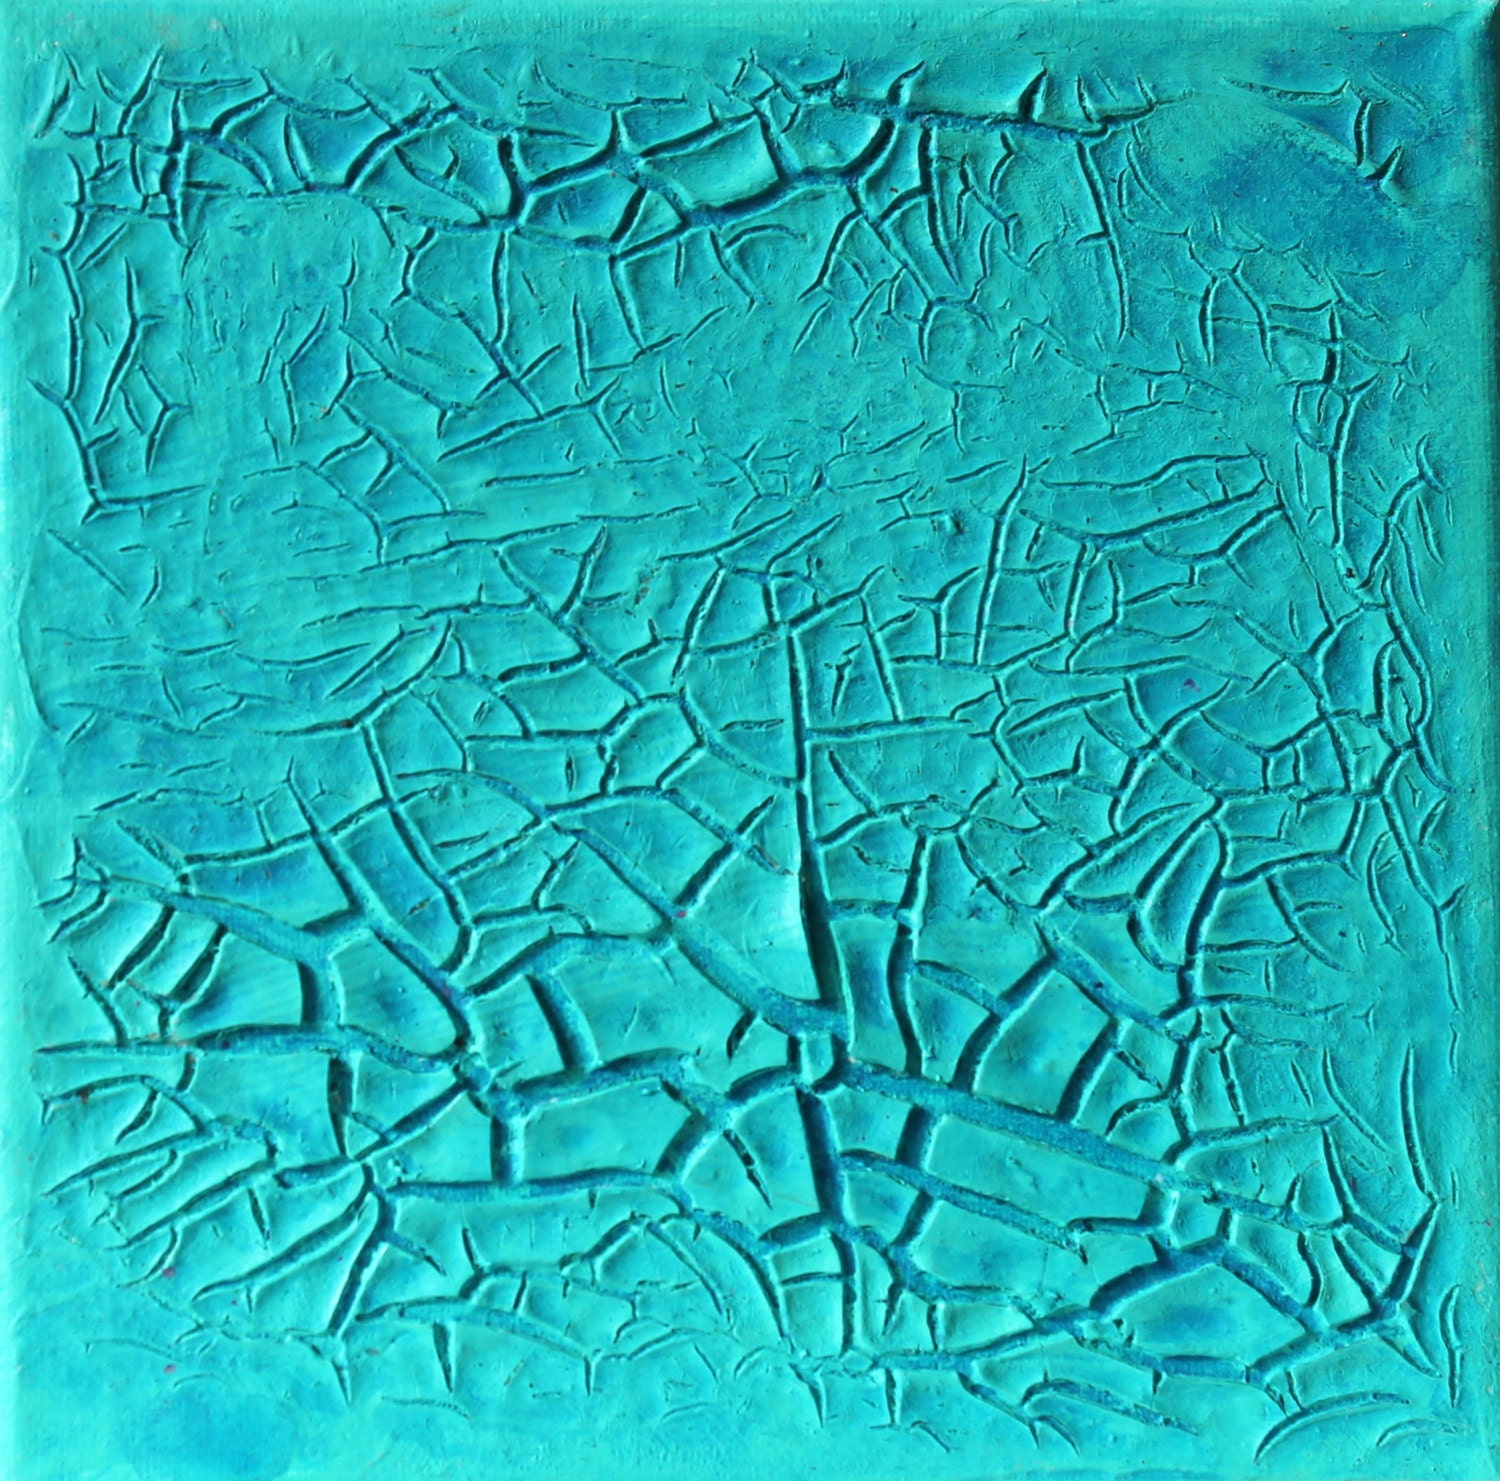 Abstract on canvas 5,9x5,9x0,59"  original painting mixed media turquoise - AtelierMaltopf